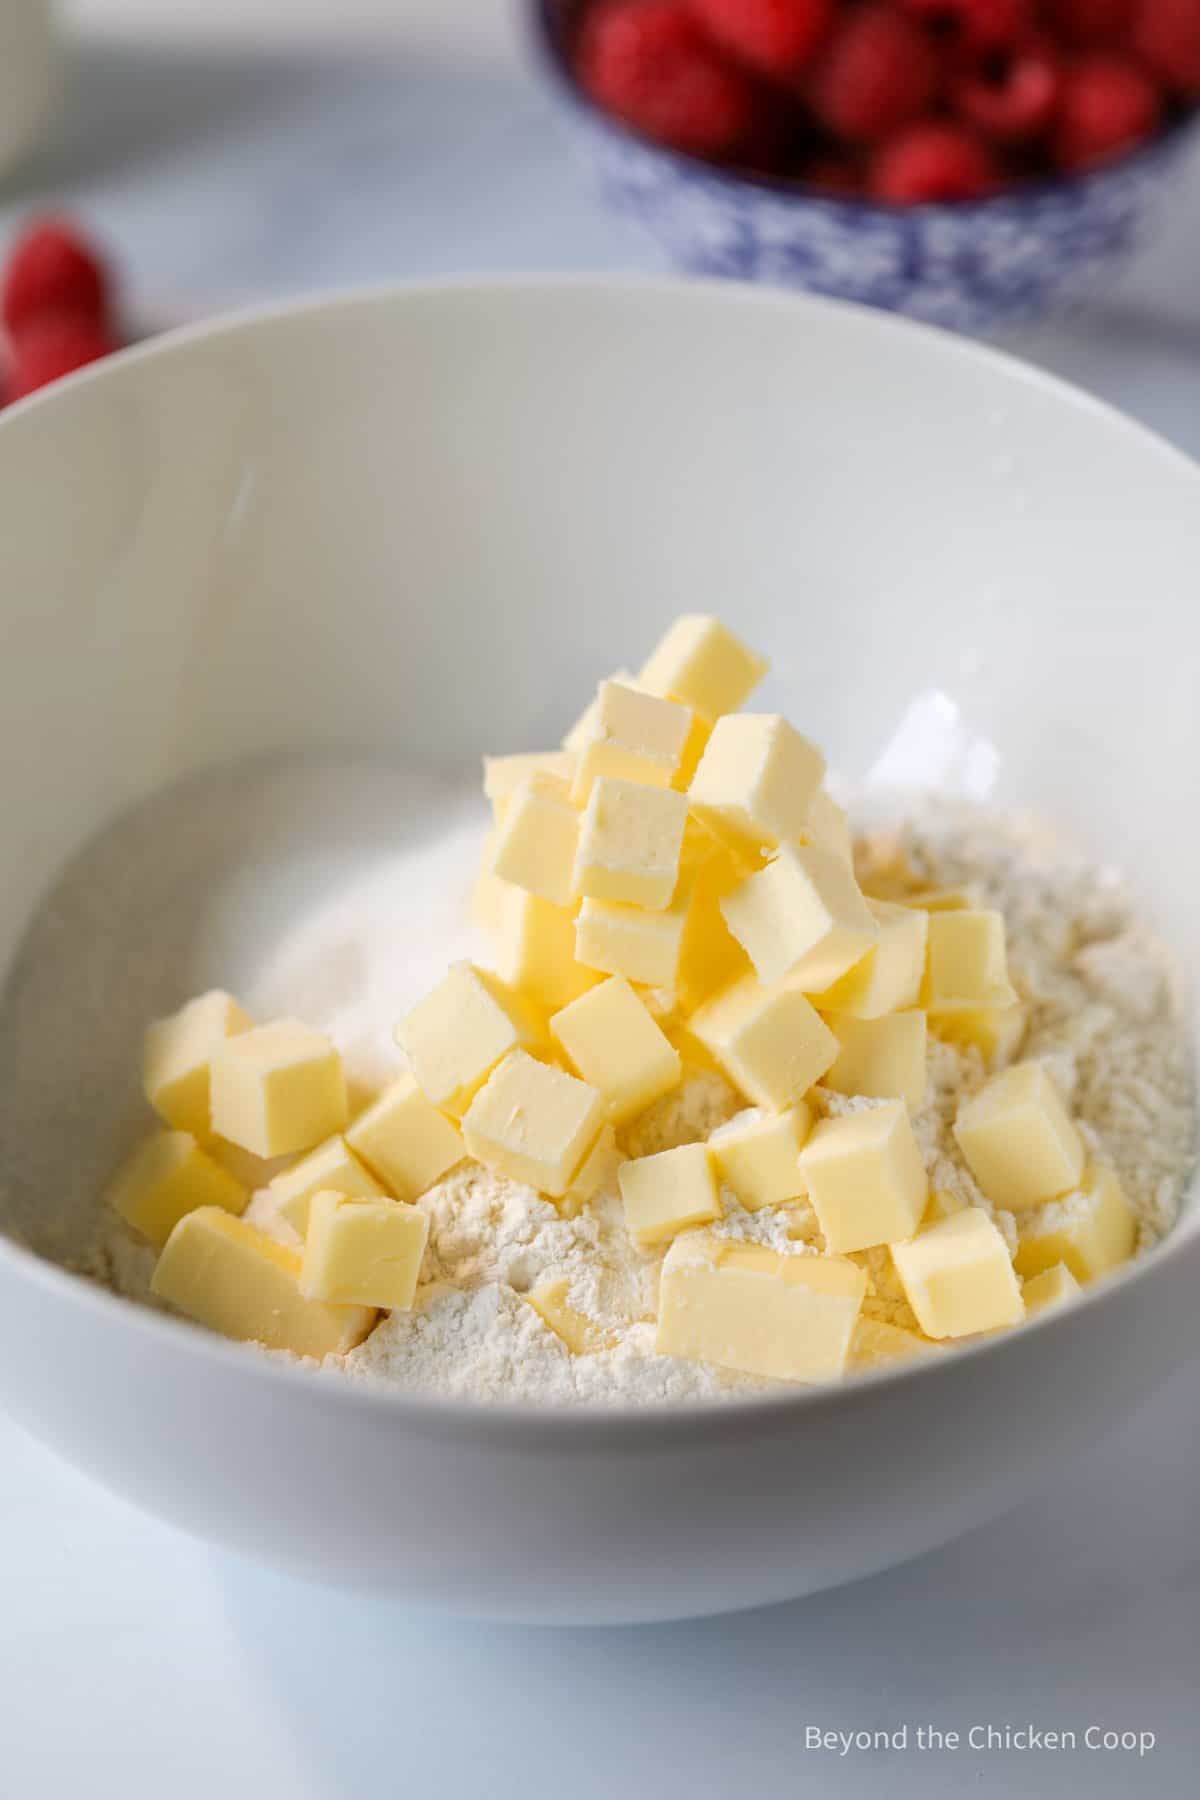 Cubes of butter in a bowl of flour.